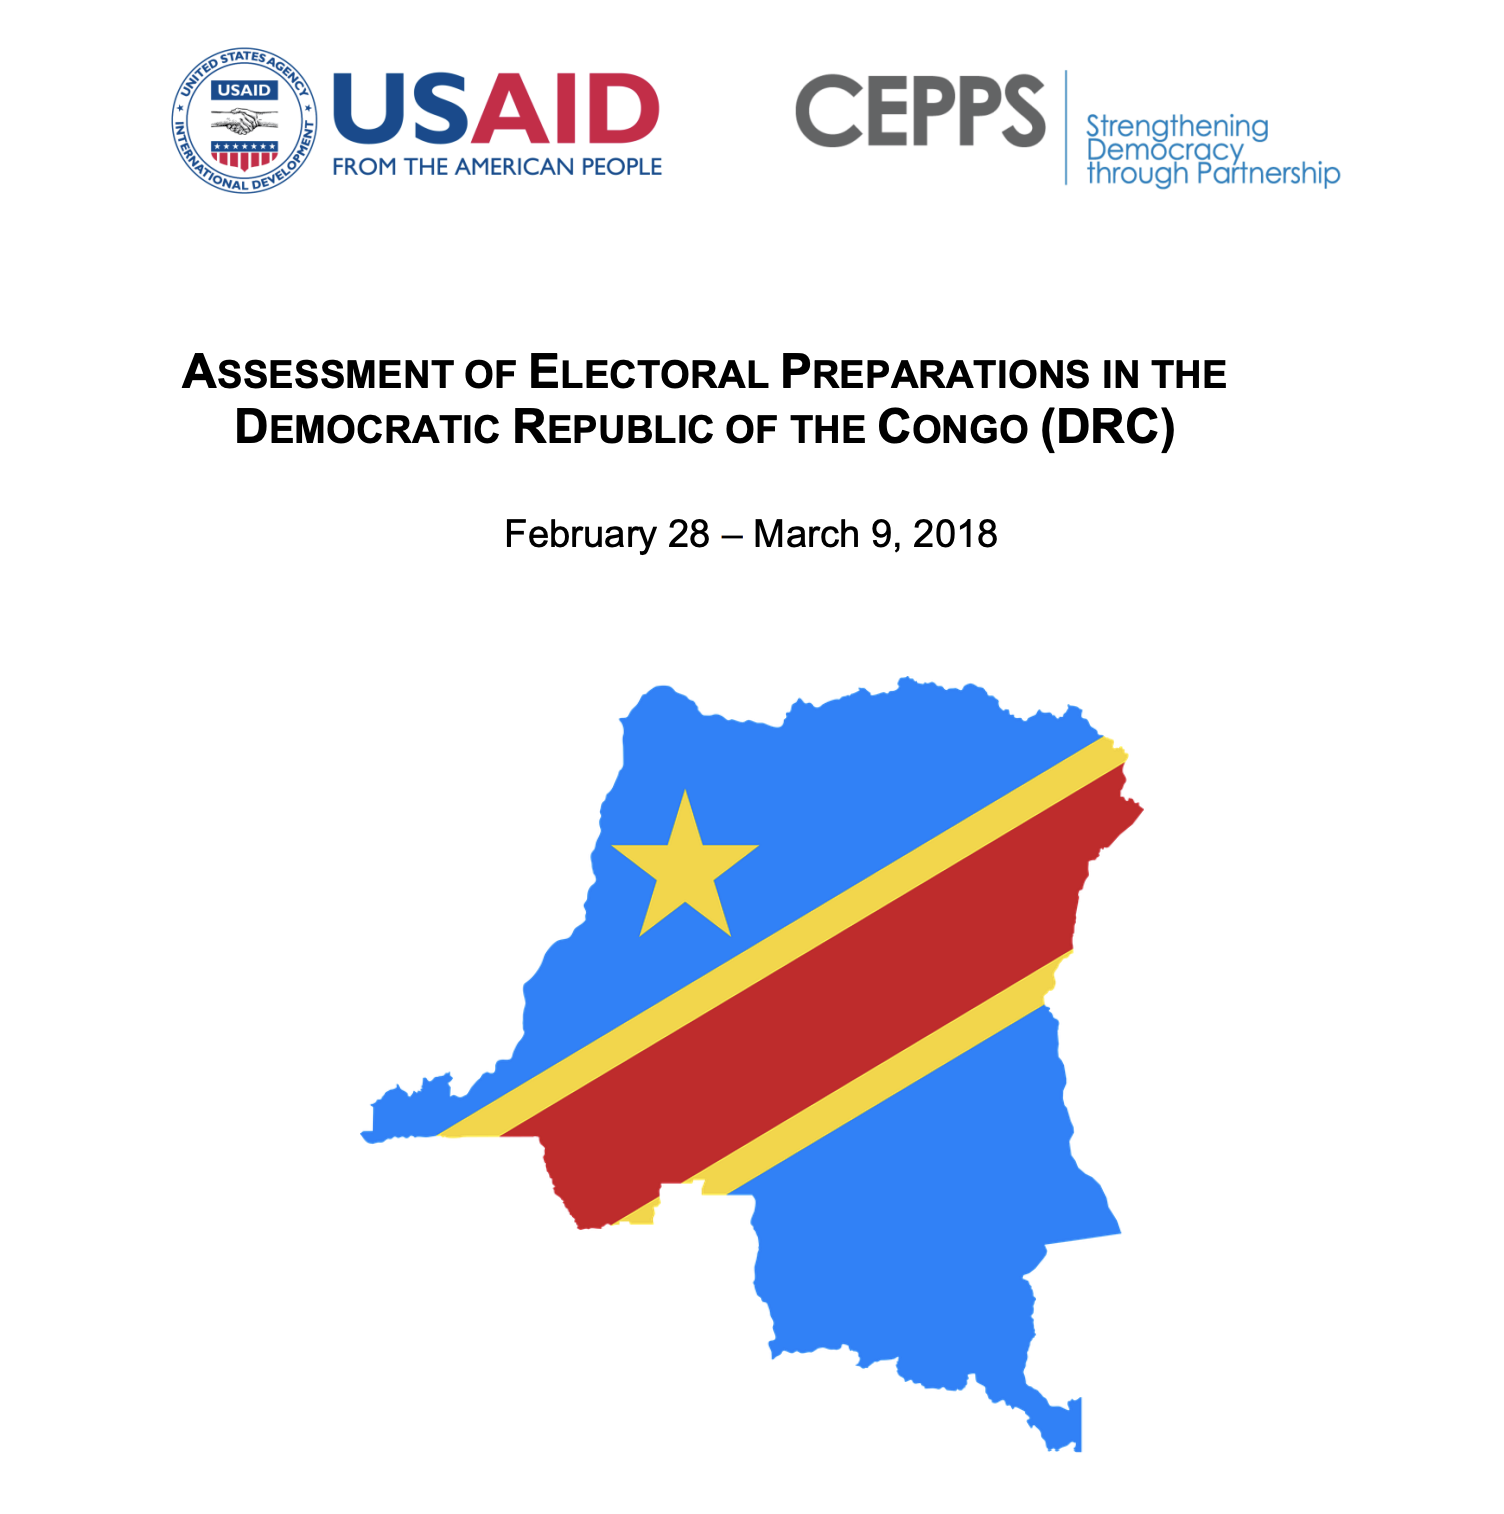 Assessment of Electoral Preparations in the Democratic Republic of the